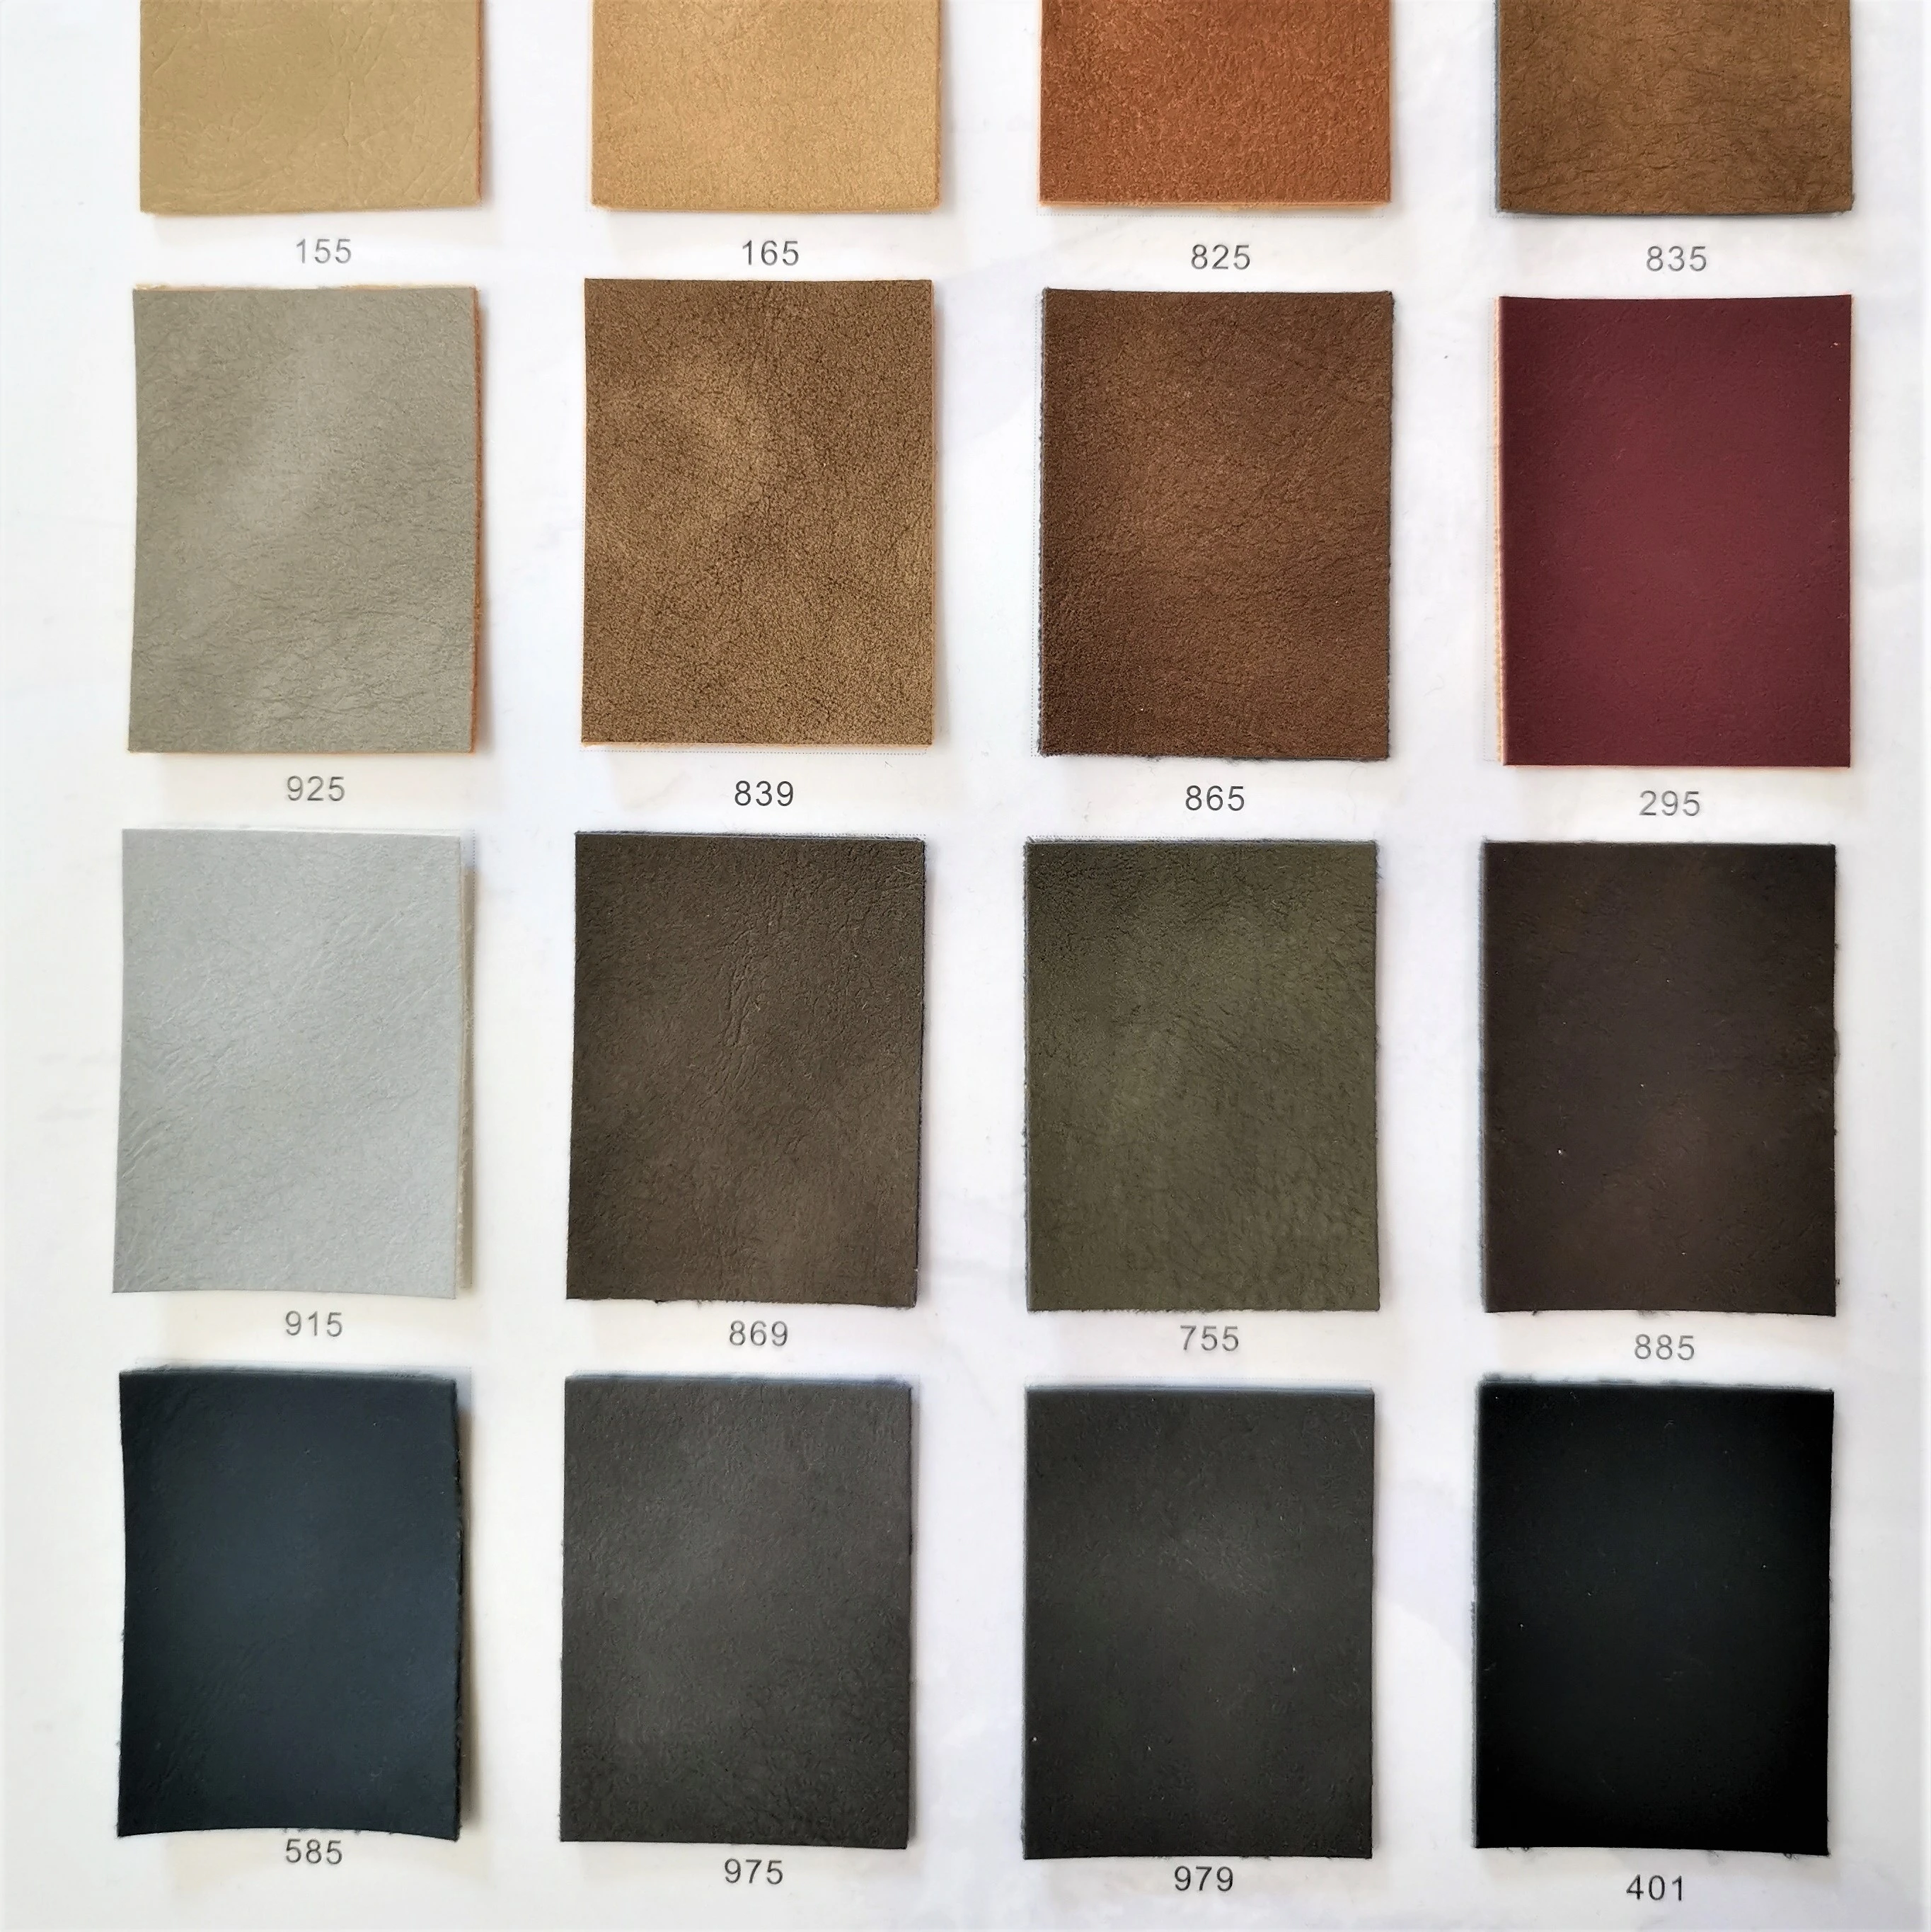 Pu Leather Suede Embossing Leather Artificial Leather Fabric